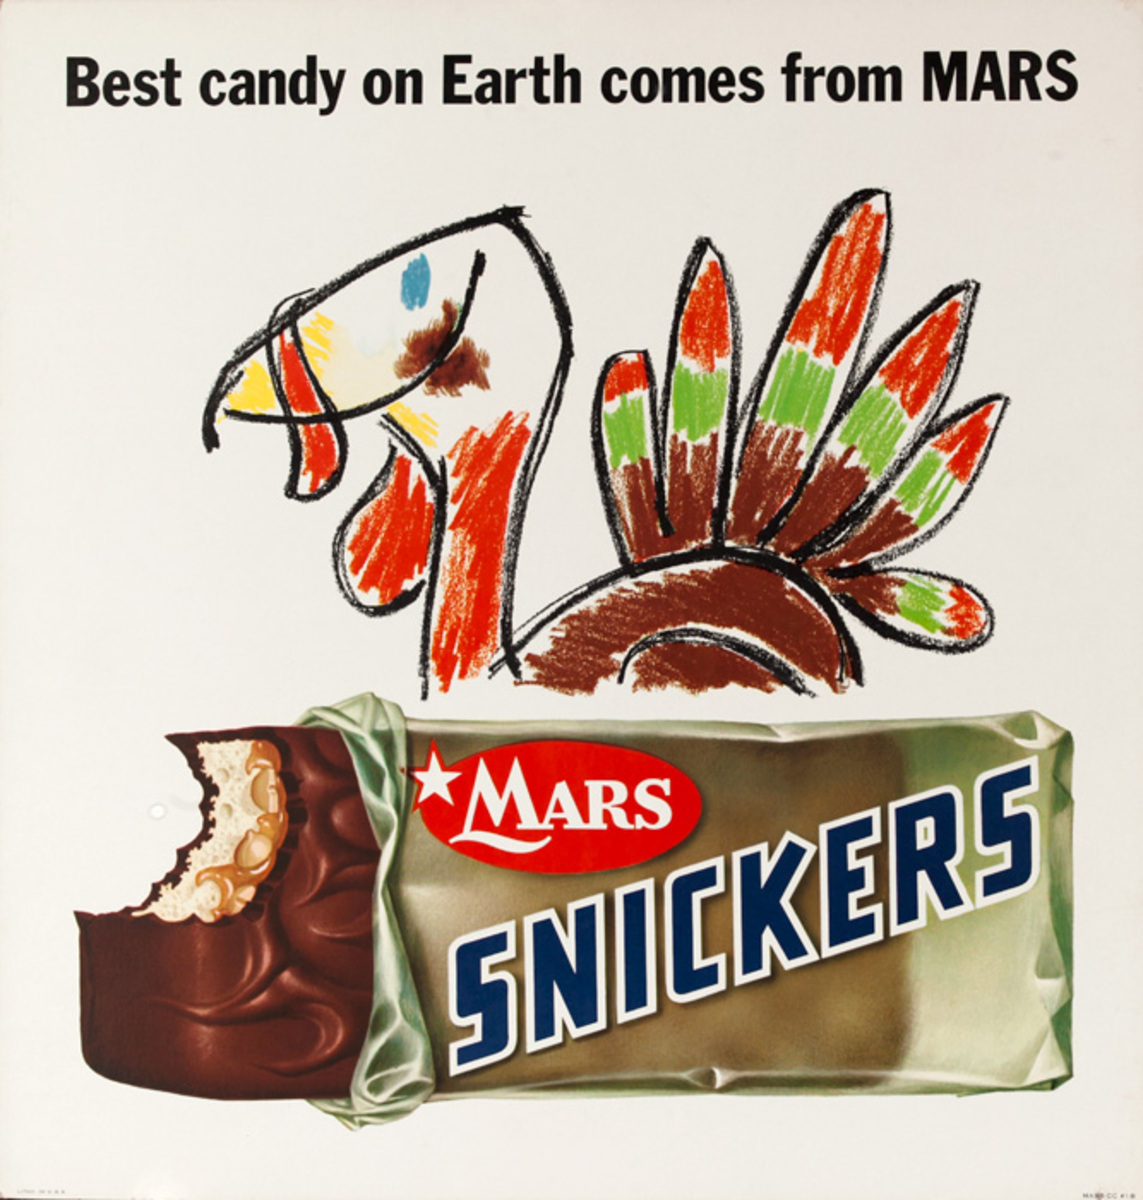 Mars Candy Original Advertising Poster, Best Candy on Earth comes from MARS. turkey